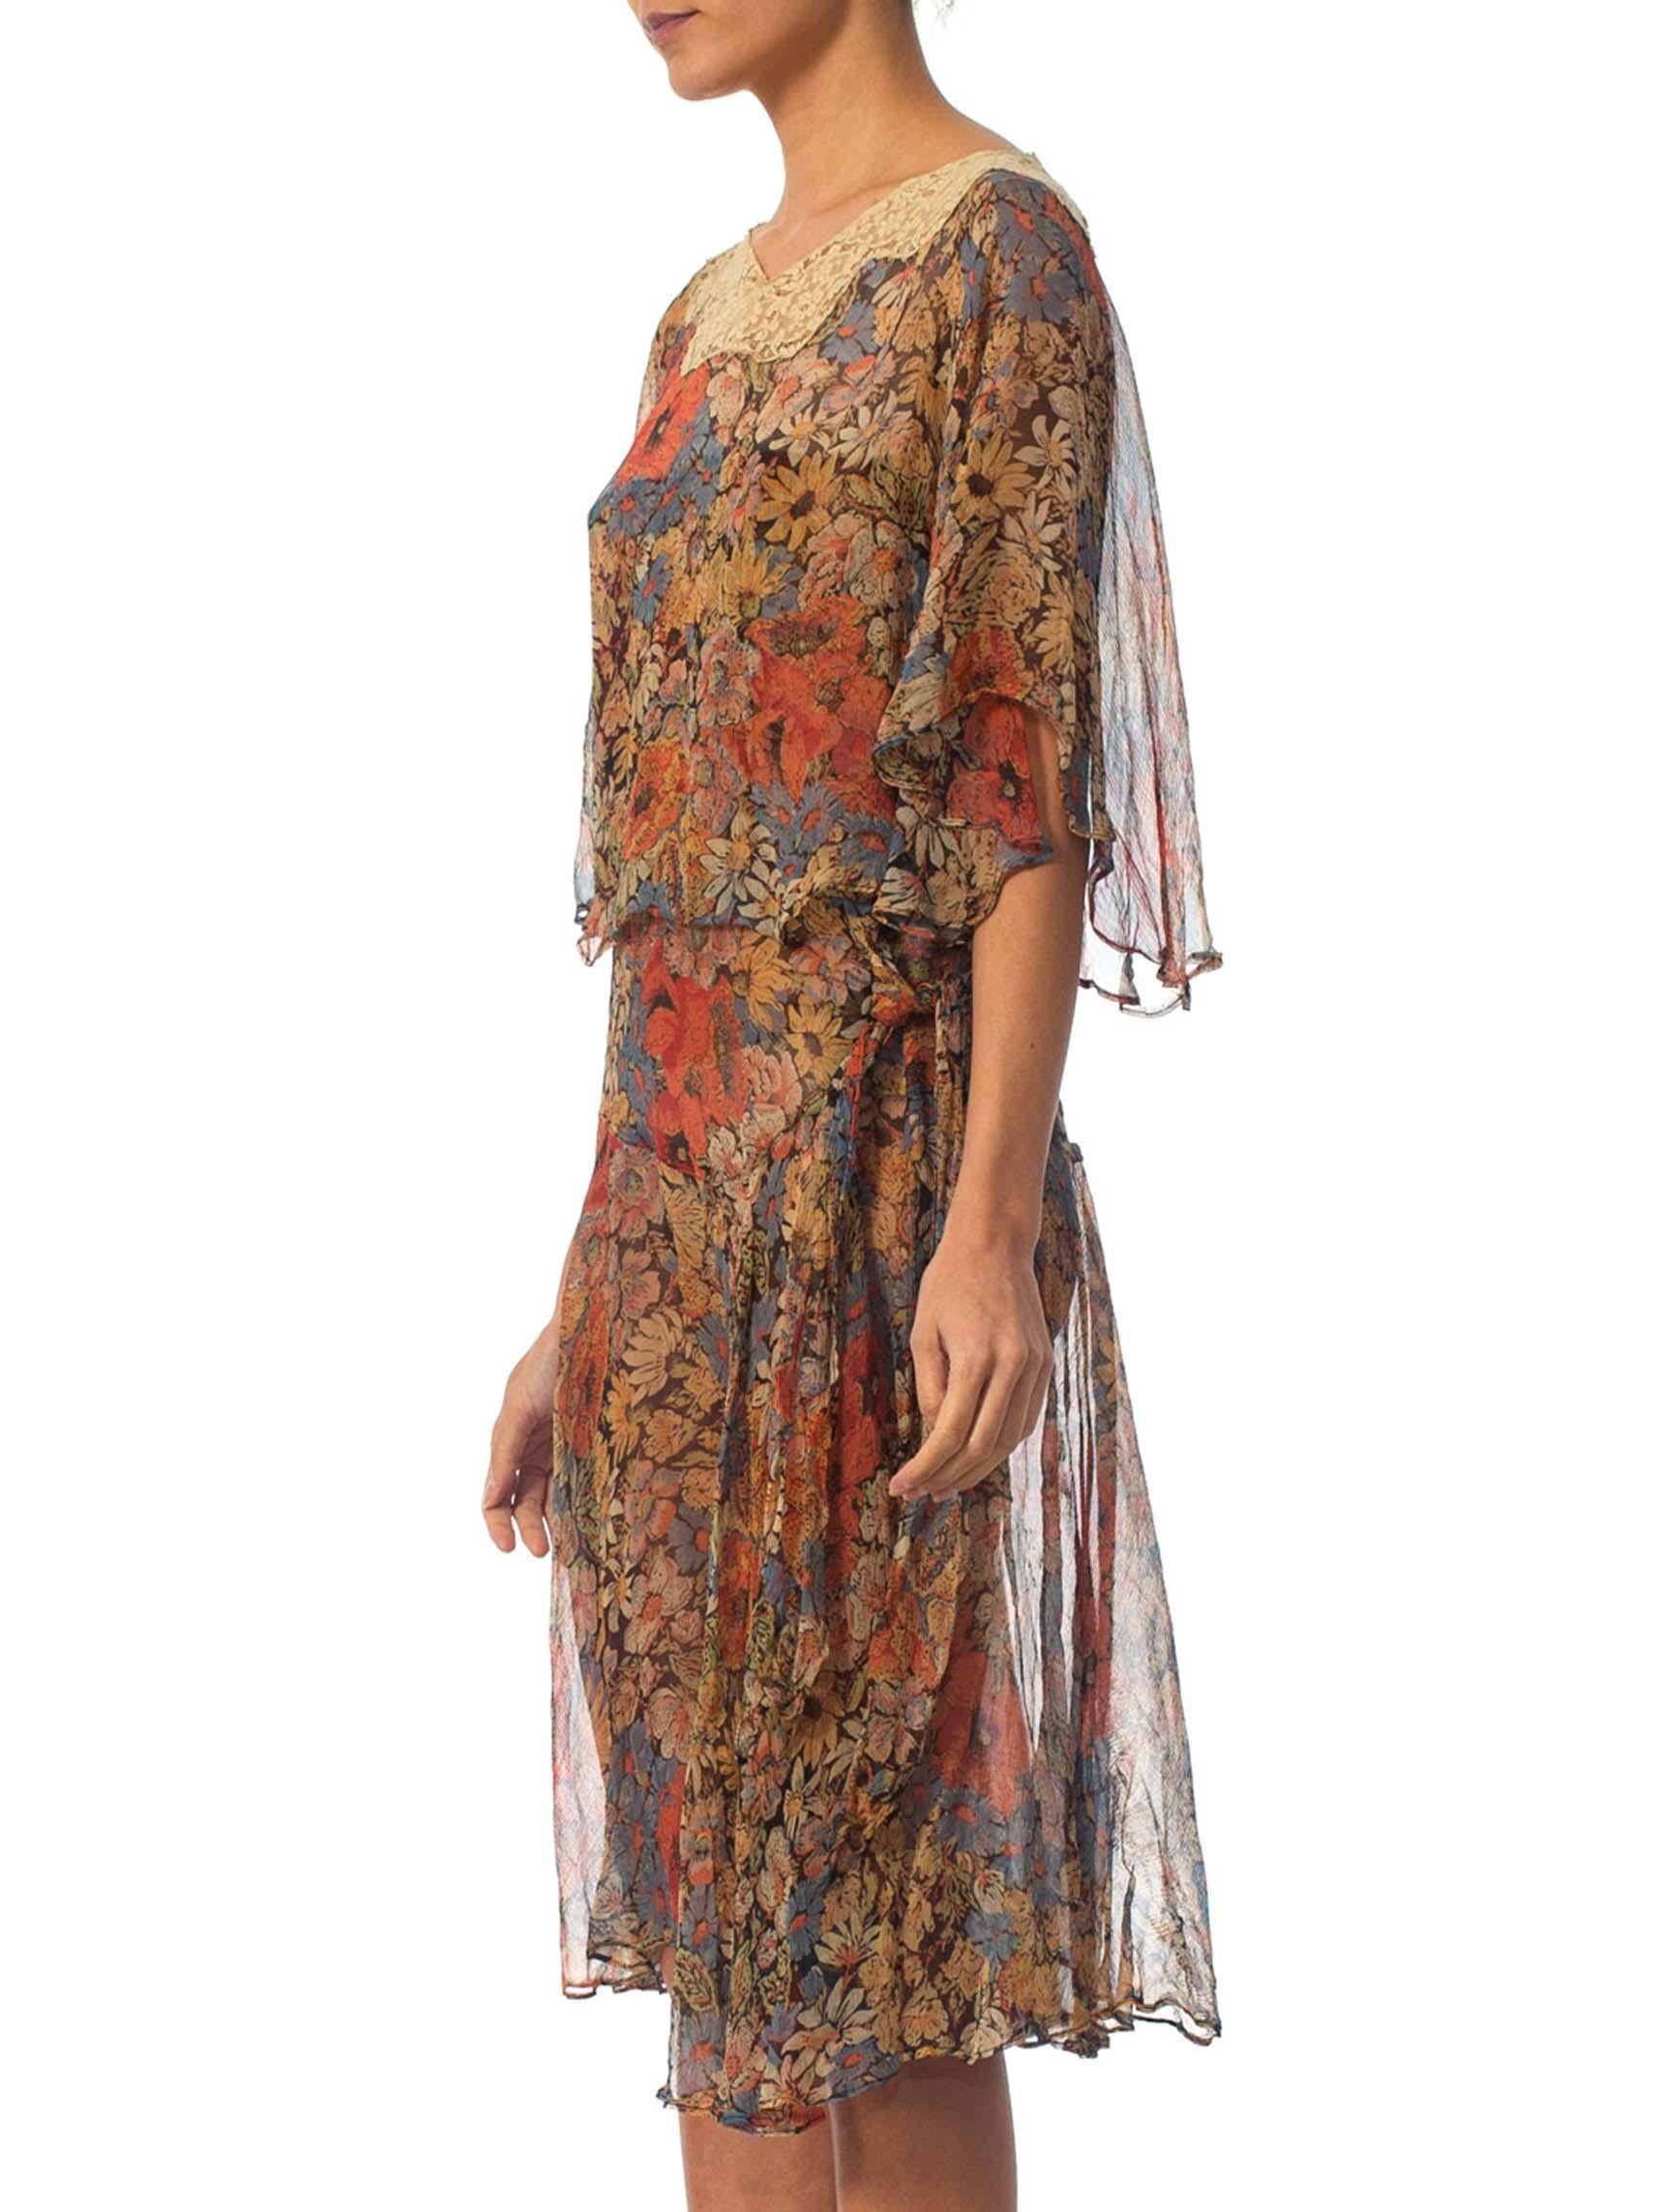 1920S Earth Tone Floral Silk Mousseline Dress With Lace Collar & Caped Bodice In Excellent Condition For Sale In New York, NY